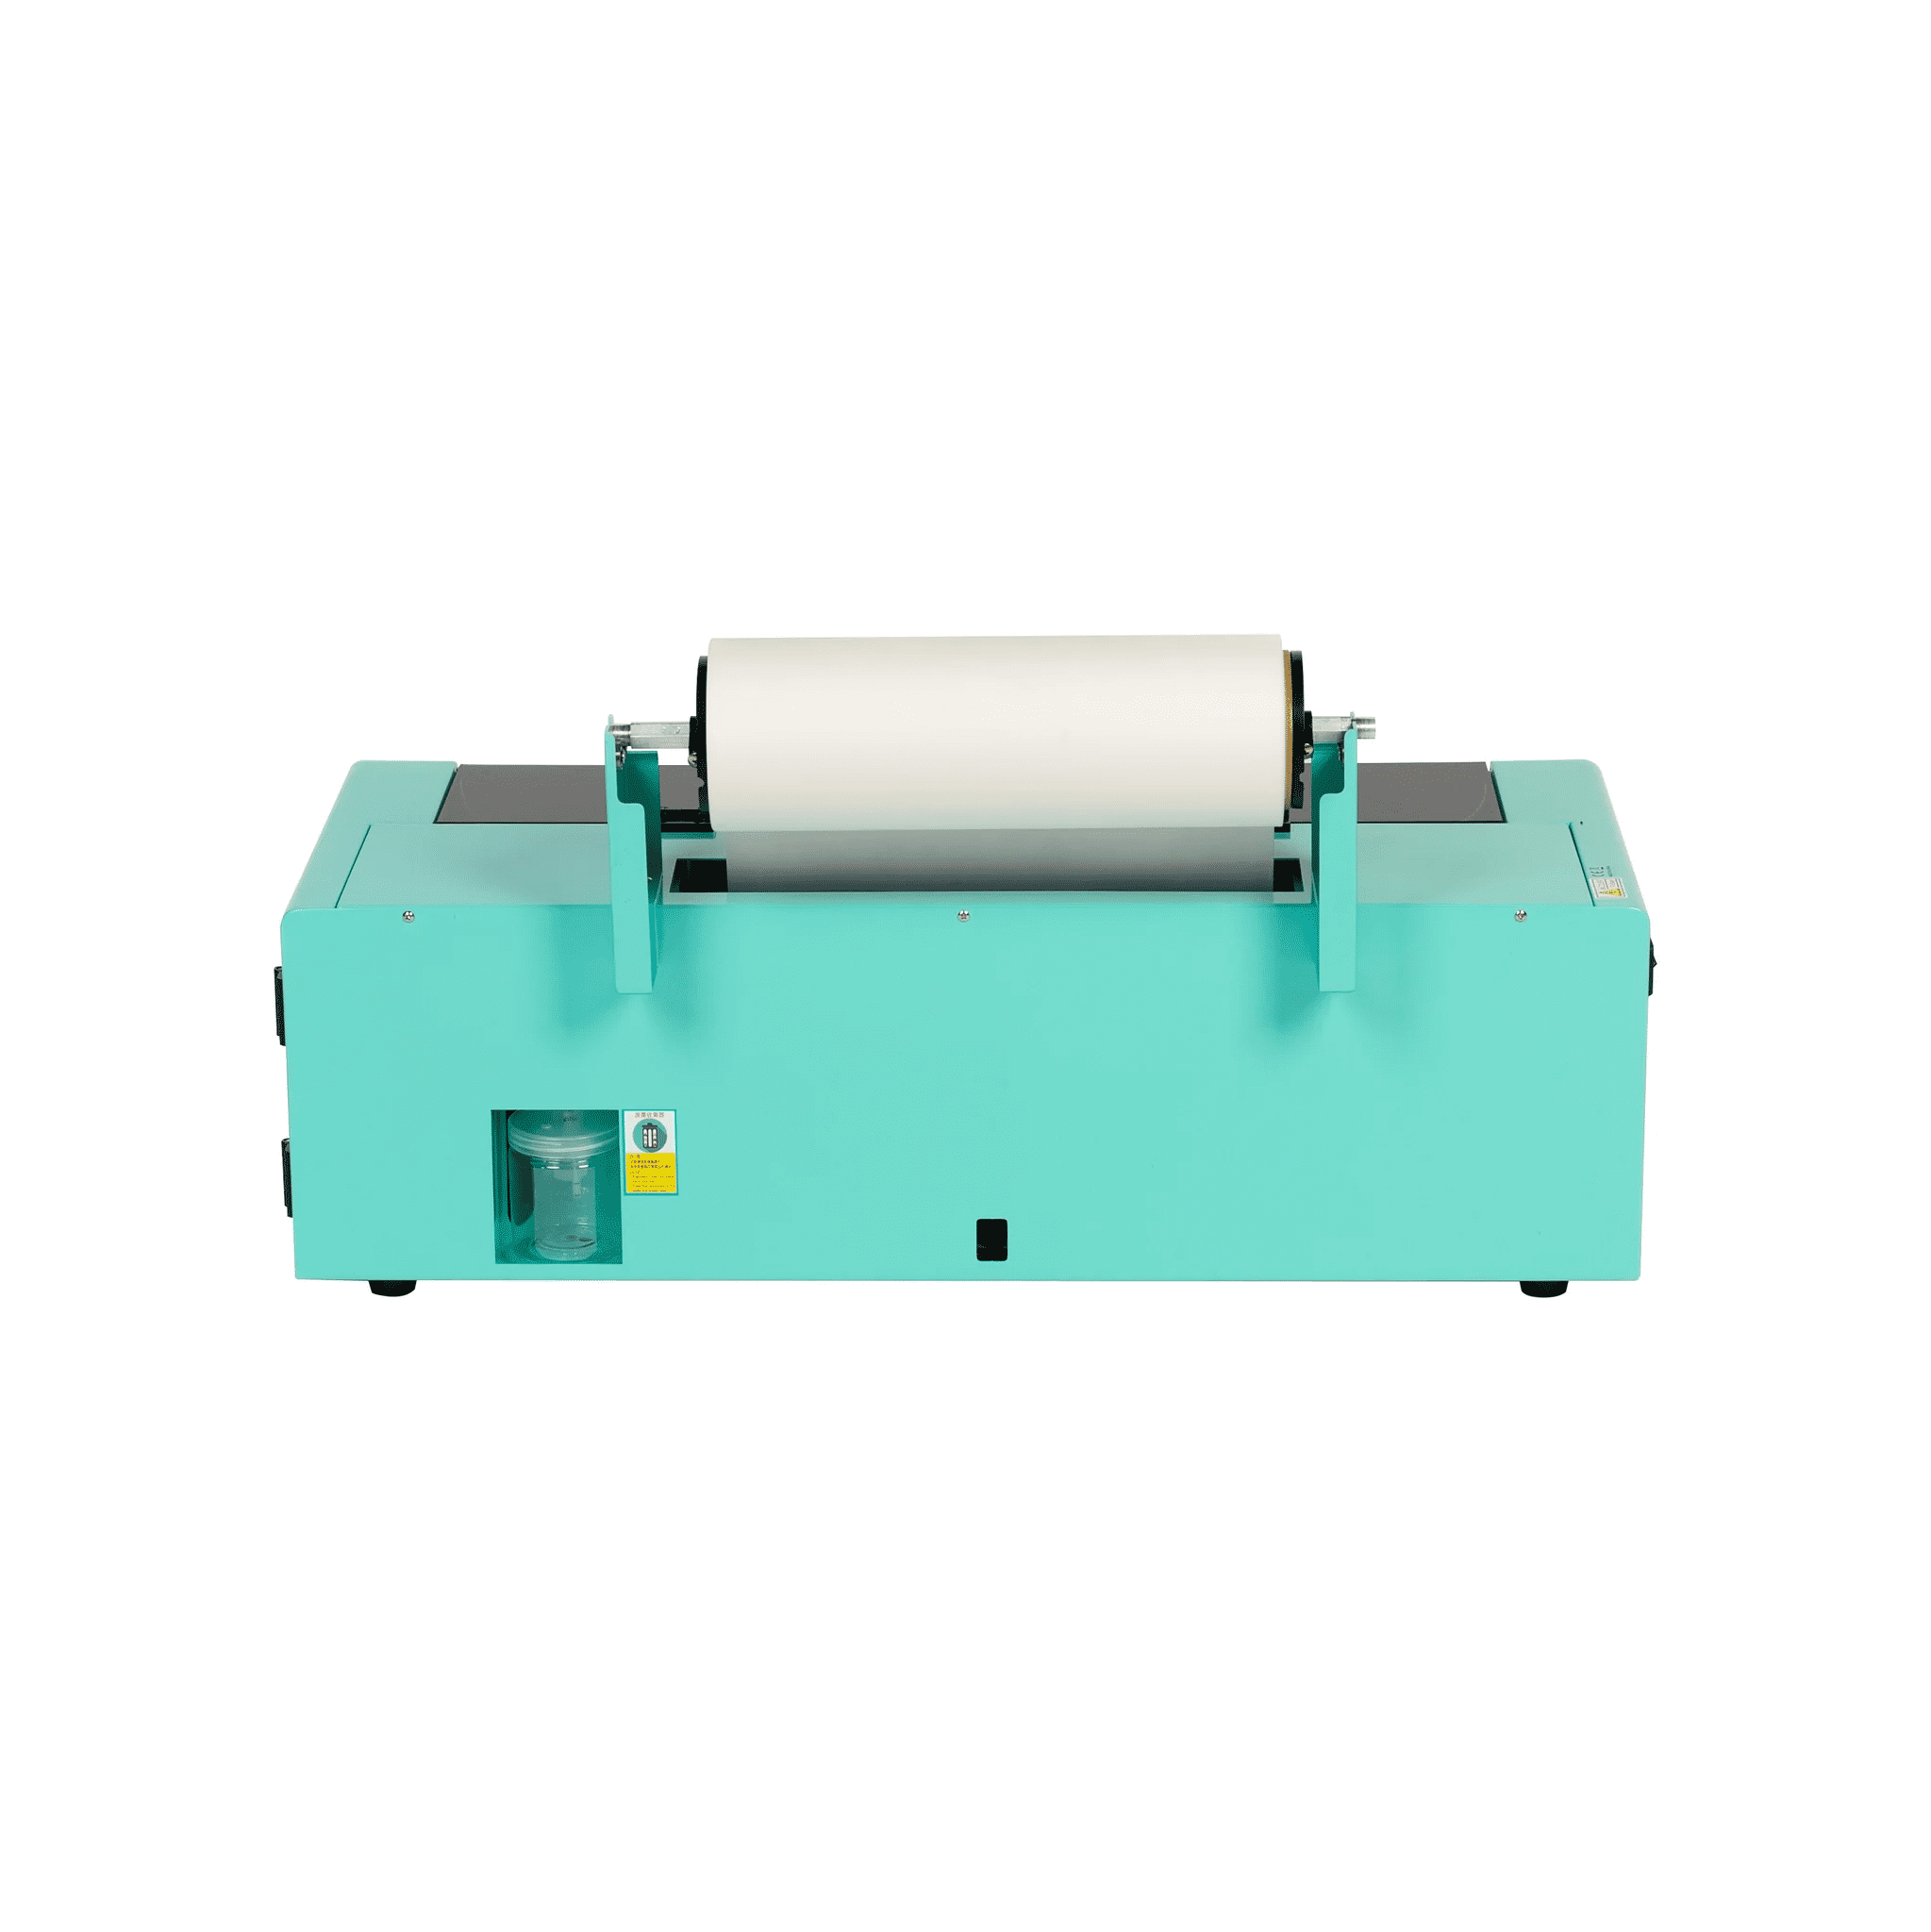 Procolored L1800 DTF Transfer Printer with Roll Feeder Direct to Film  T-shirt Printer